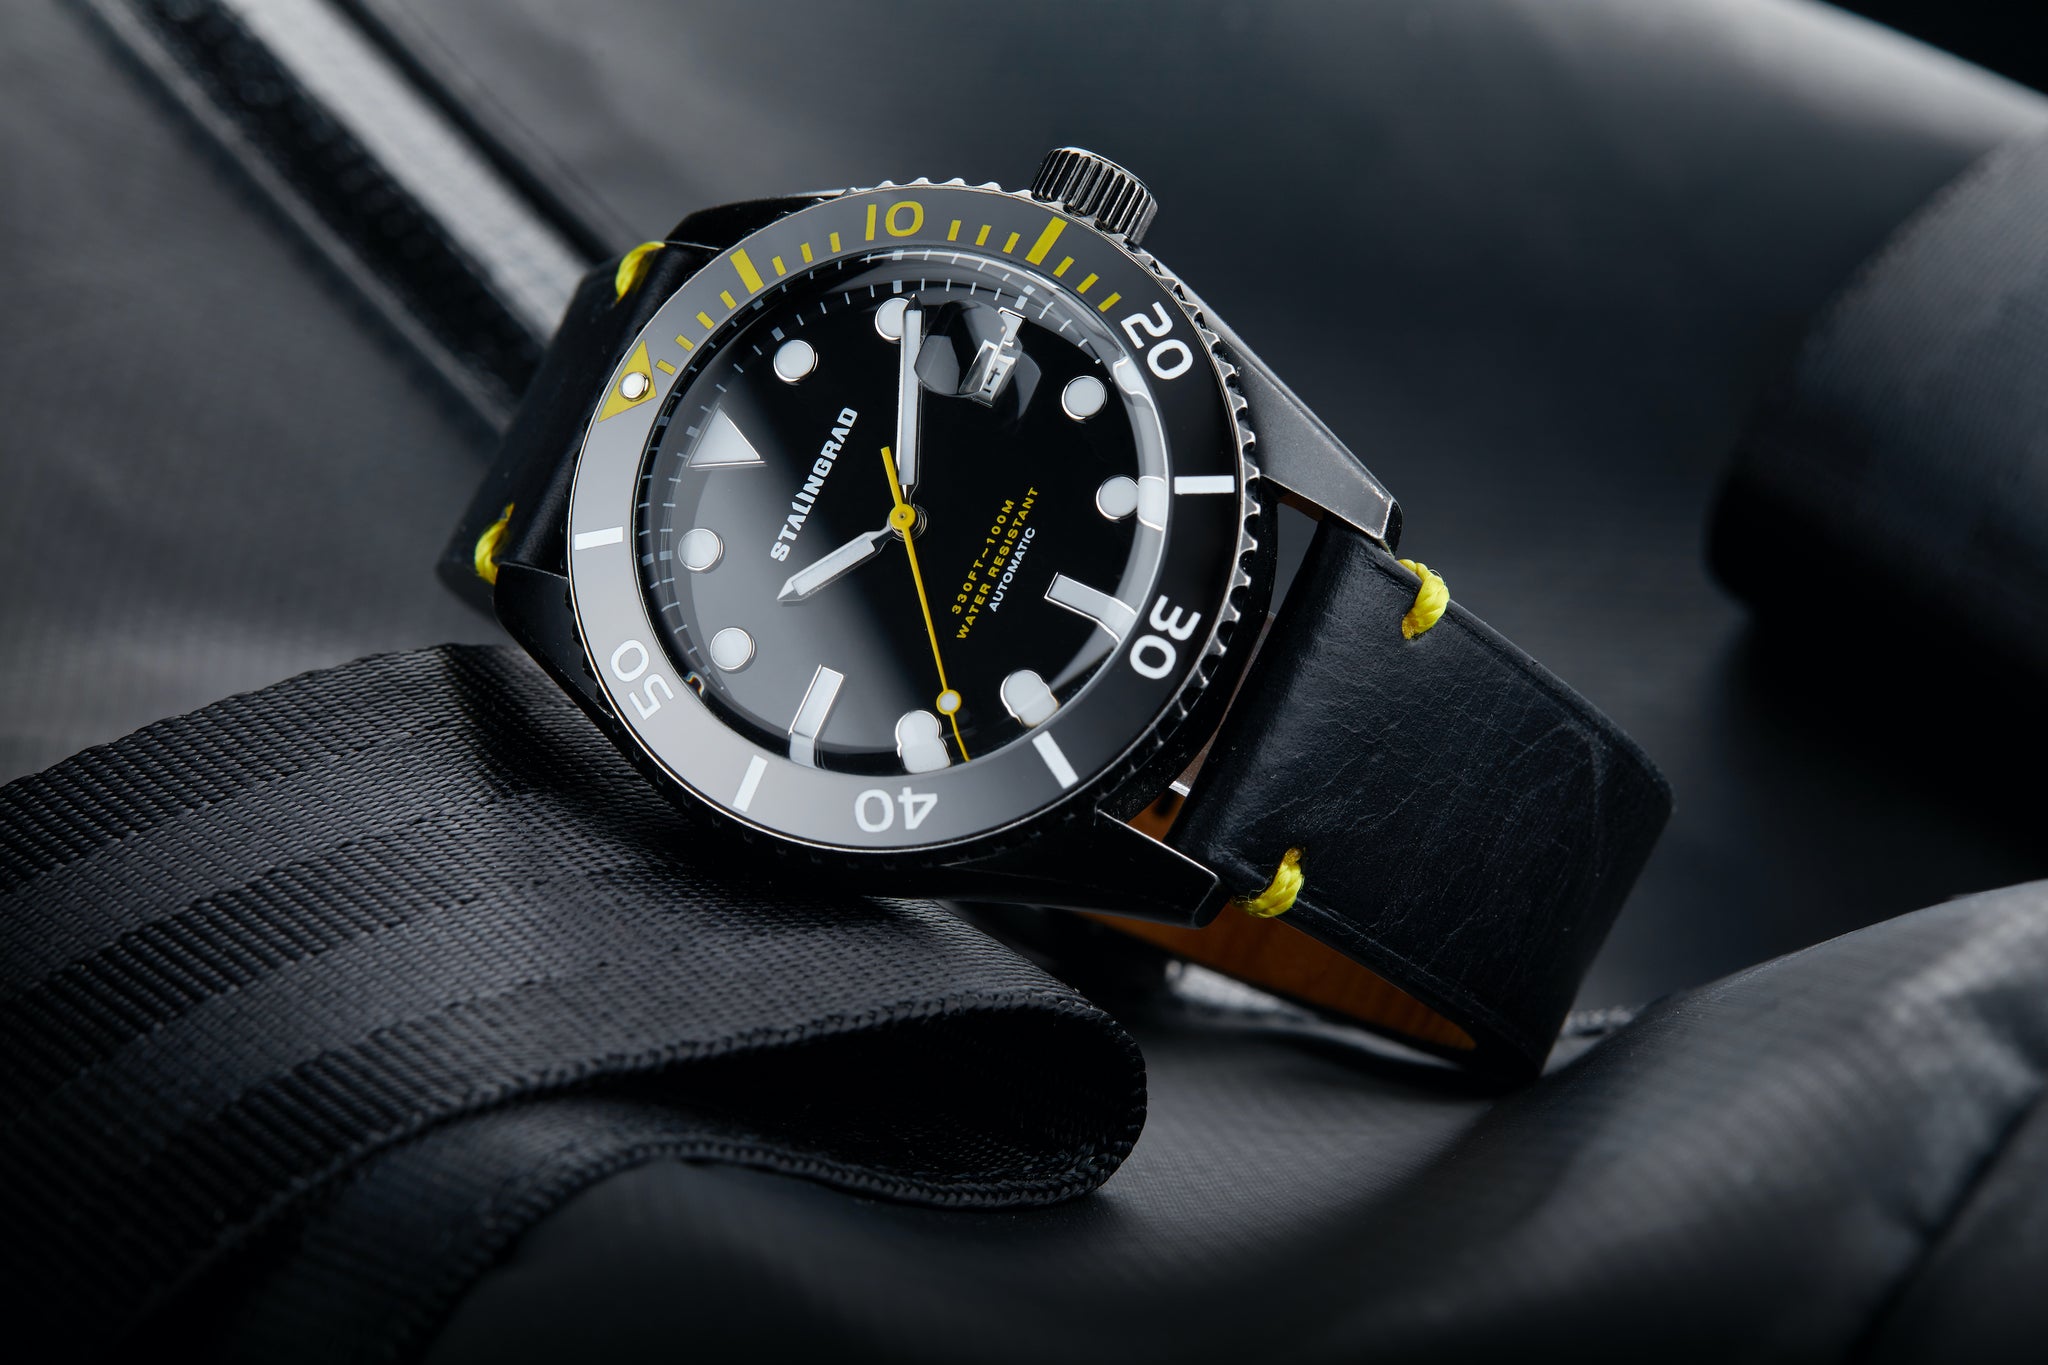 Stalingrad Volga defender automatic watch with a black case and black dial with yellow accents in a black leather strap, diagonal view of watch on a dark background